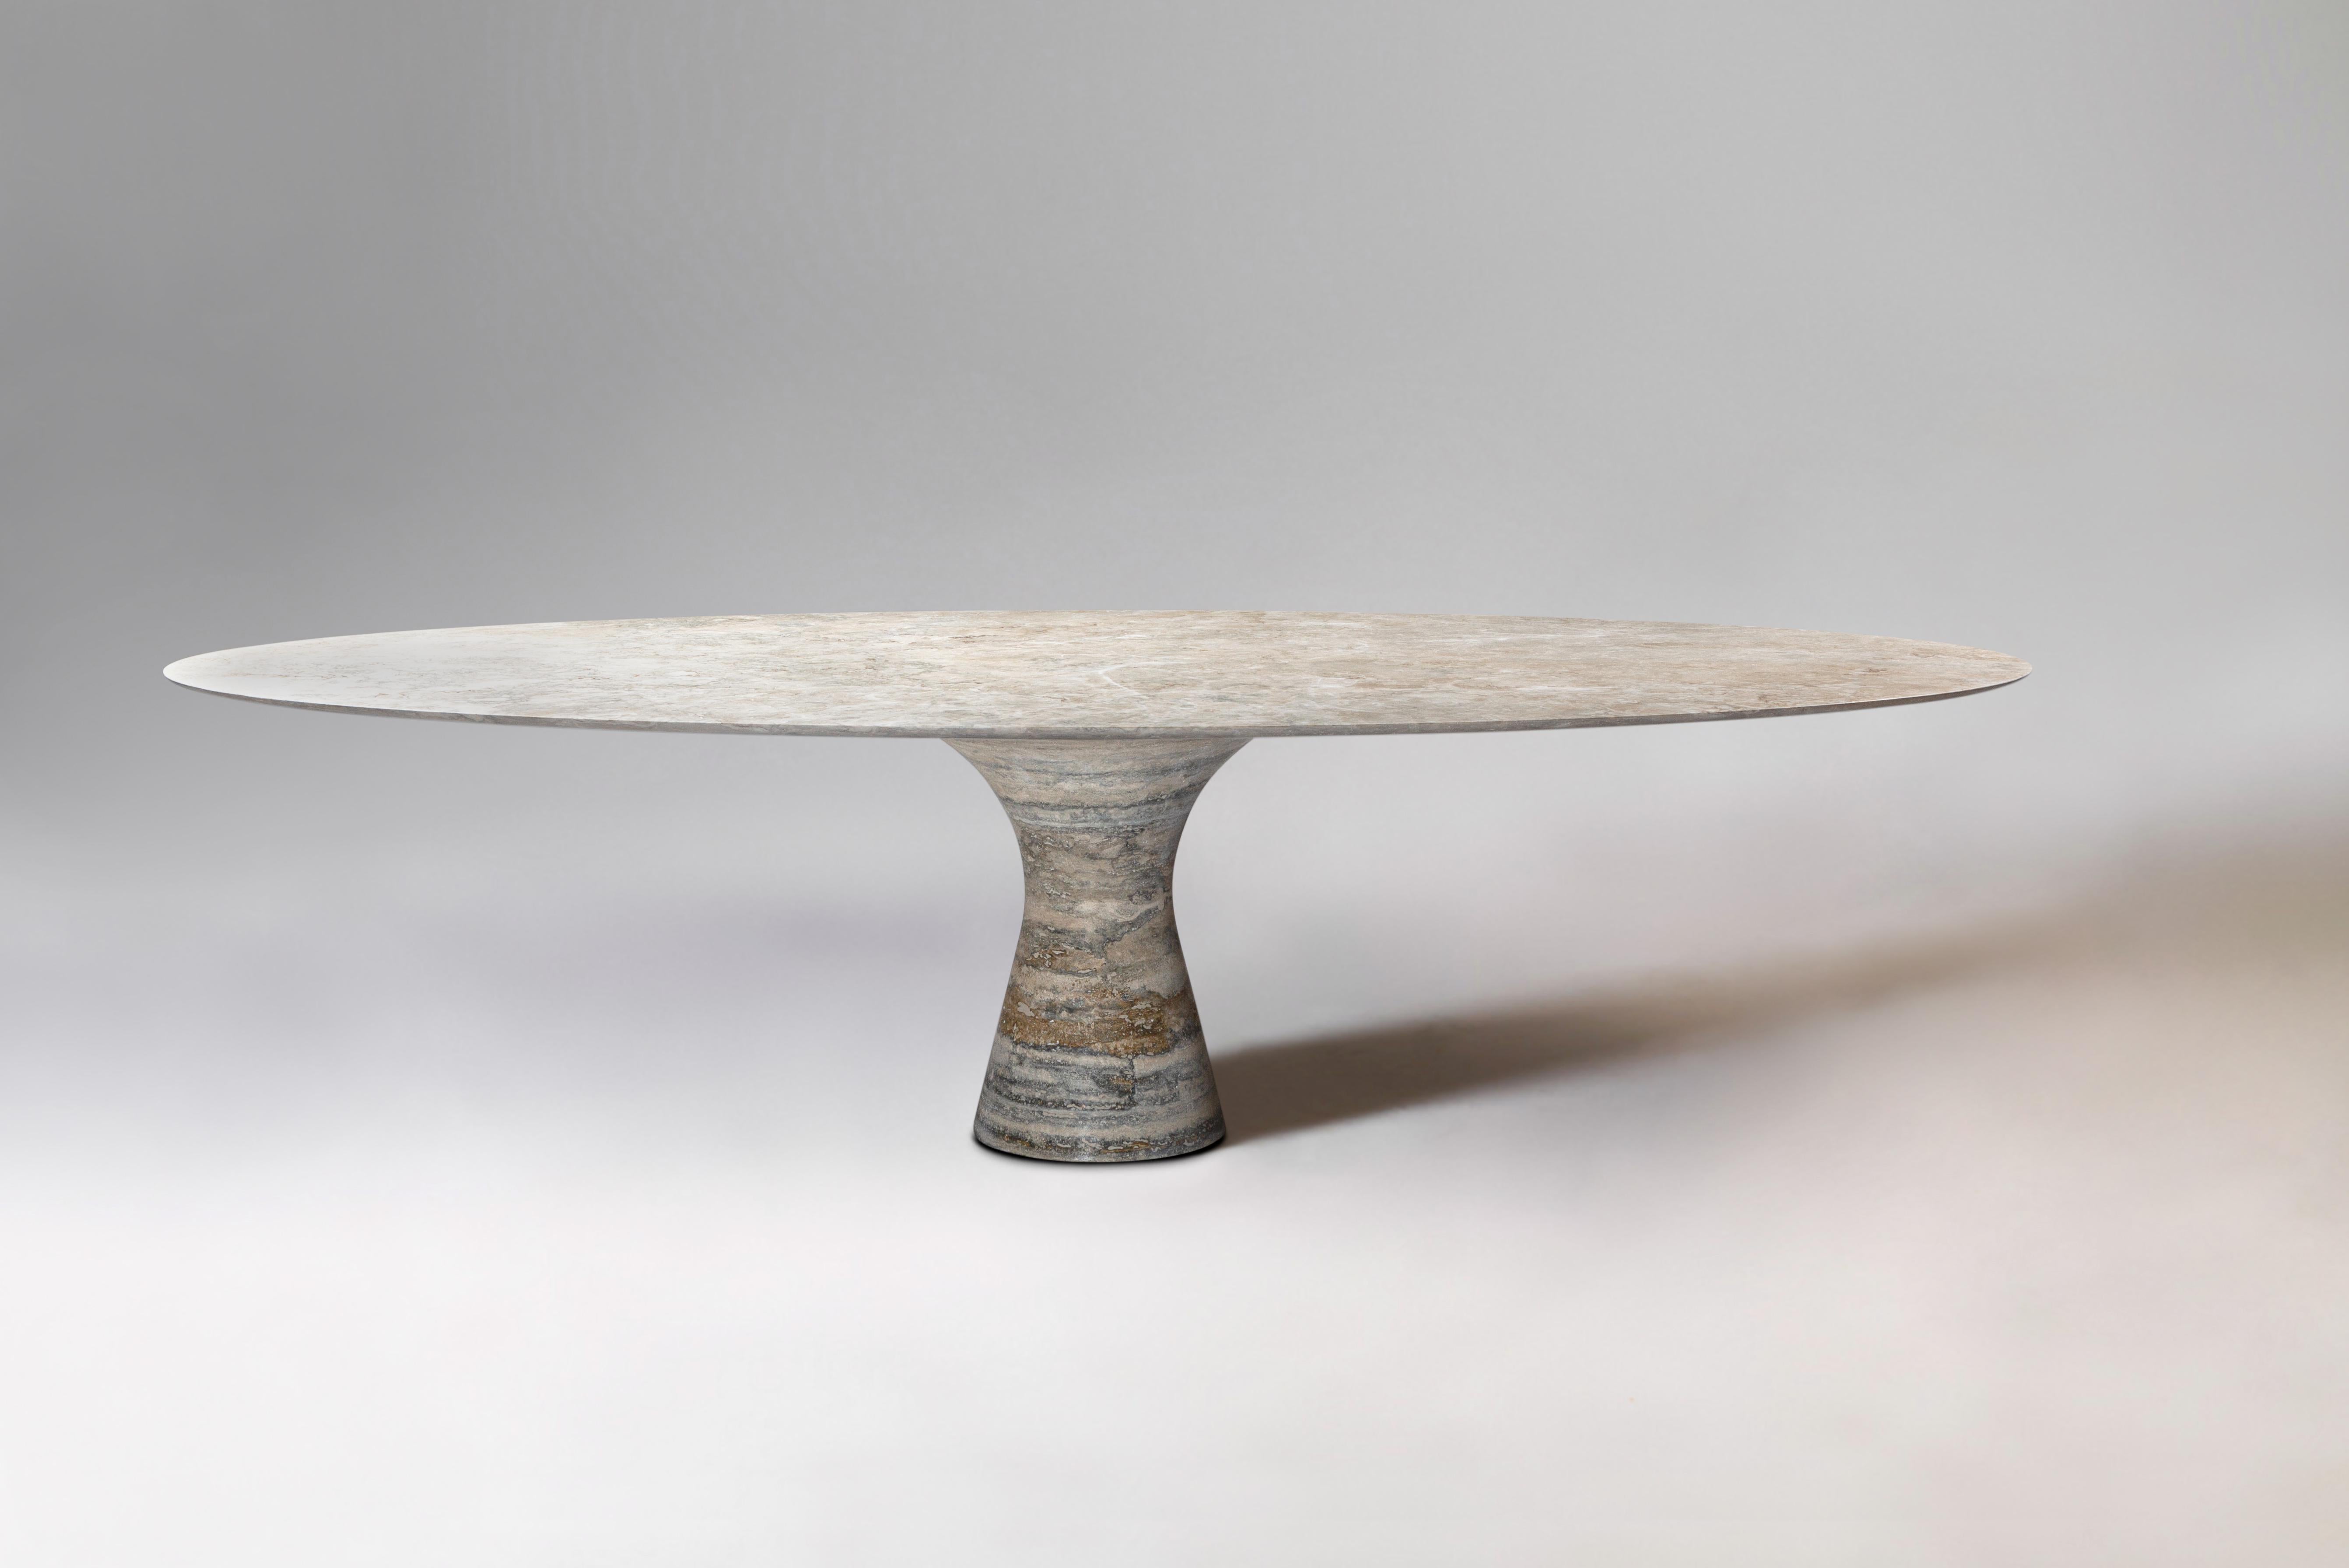 Travertino Silver Refined Contemporary Marble Oval Table 130/27
Dimensions: 130 x 27 cm
Materials: Travertino Silver 

Angelo is the essence of a round table in natural stone, a sculptural shape in robust material with elegant lines and refined